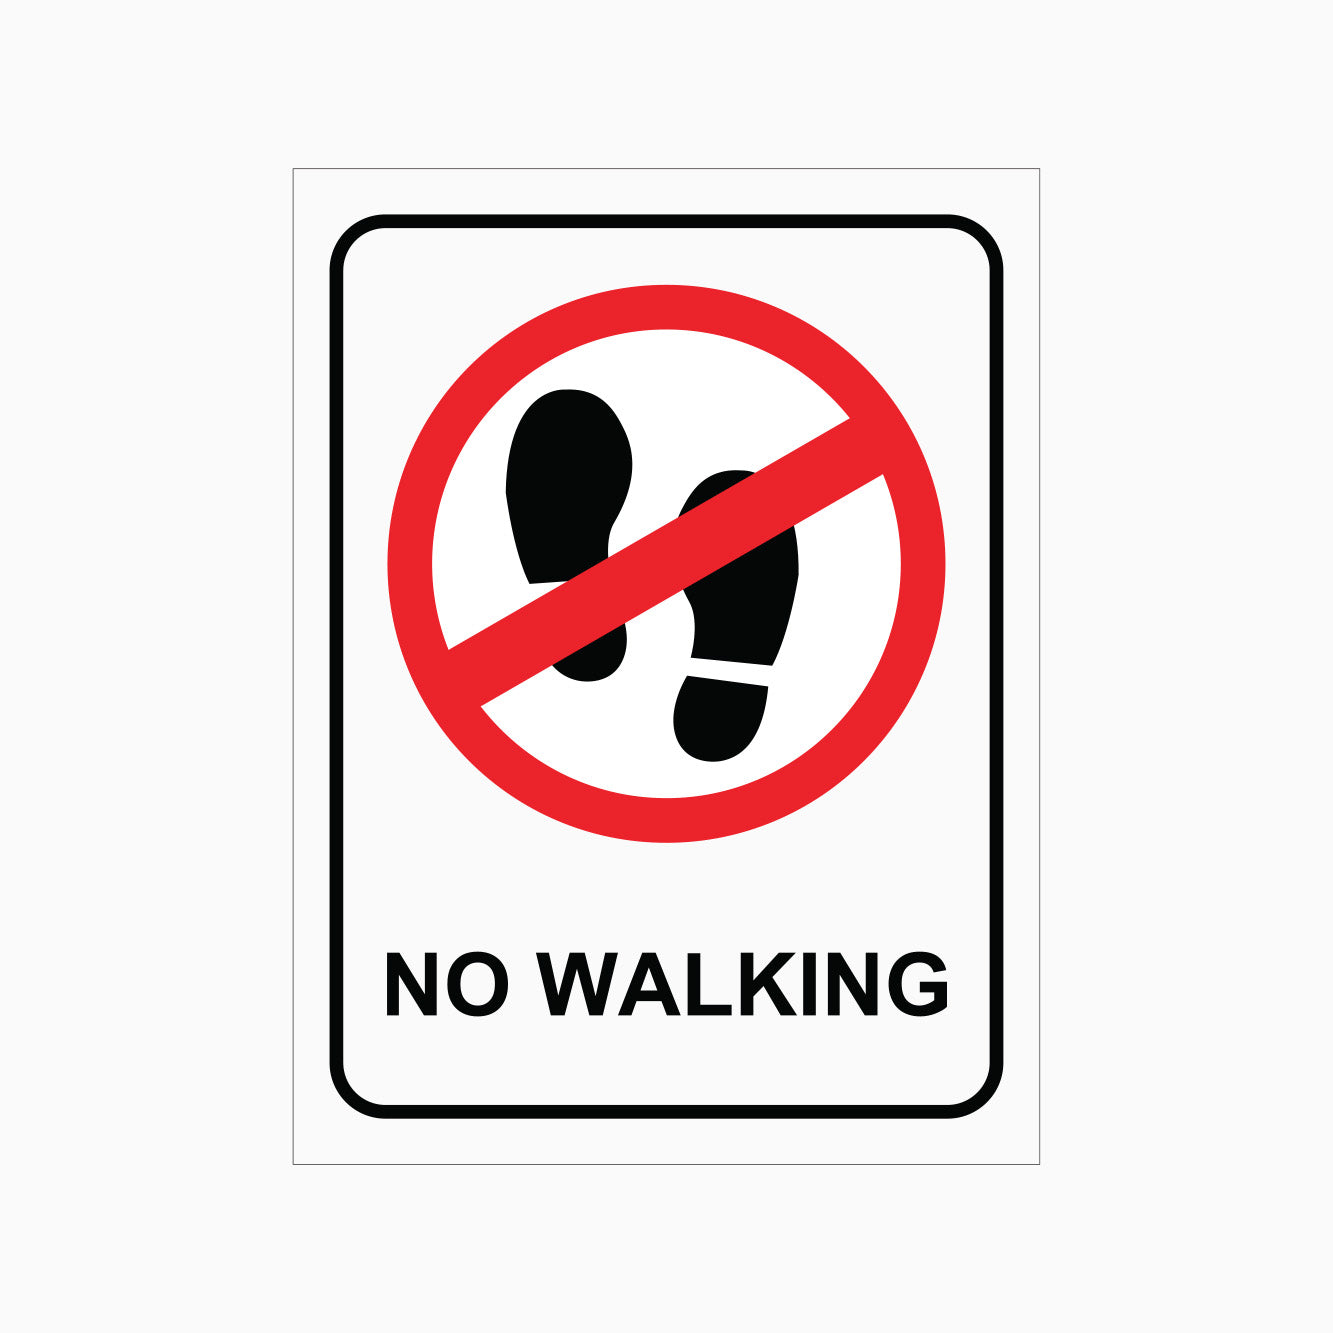 NO WALKING SIGN - PROHIBITION SIGN - GET SIGNS